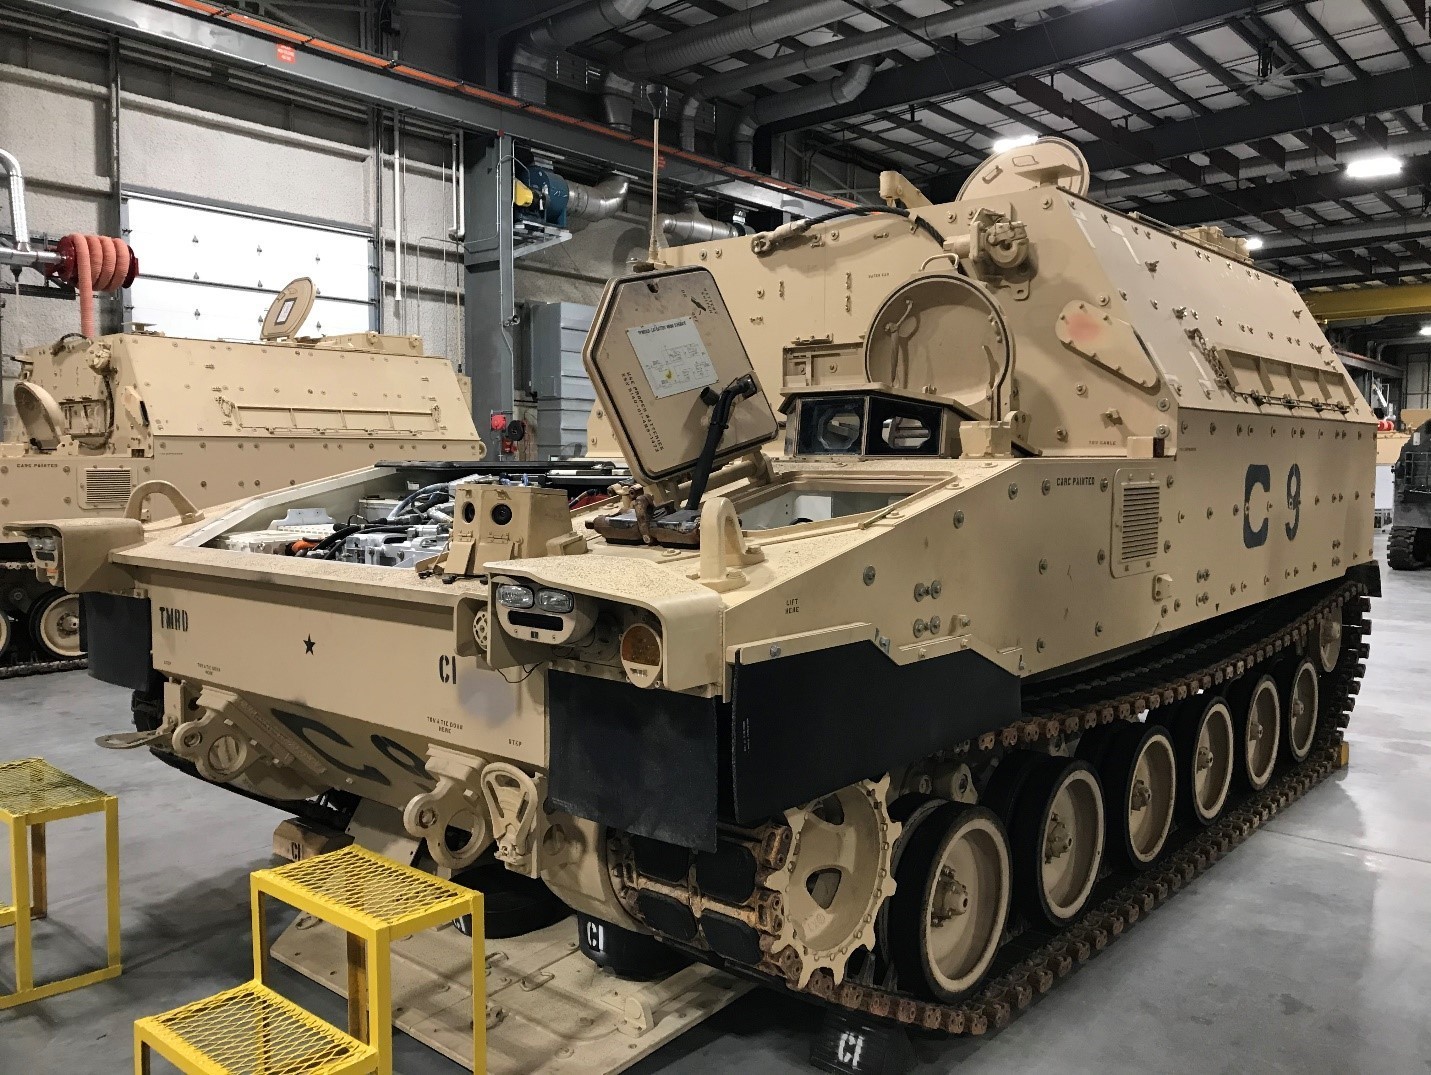 The M992A3 Field Artillery Ammunition Supply Vehicle (FAASV) Carrier Ammunition Tracked (CAT) in the maintenance bay at the U.S. Army Ordnance School, Fort Lee, Virginia.